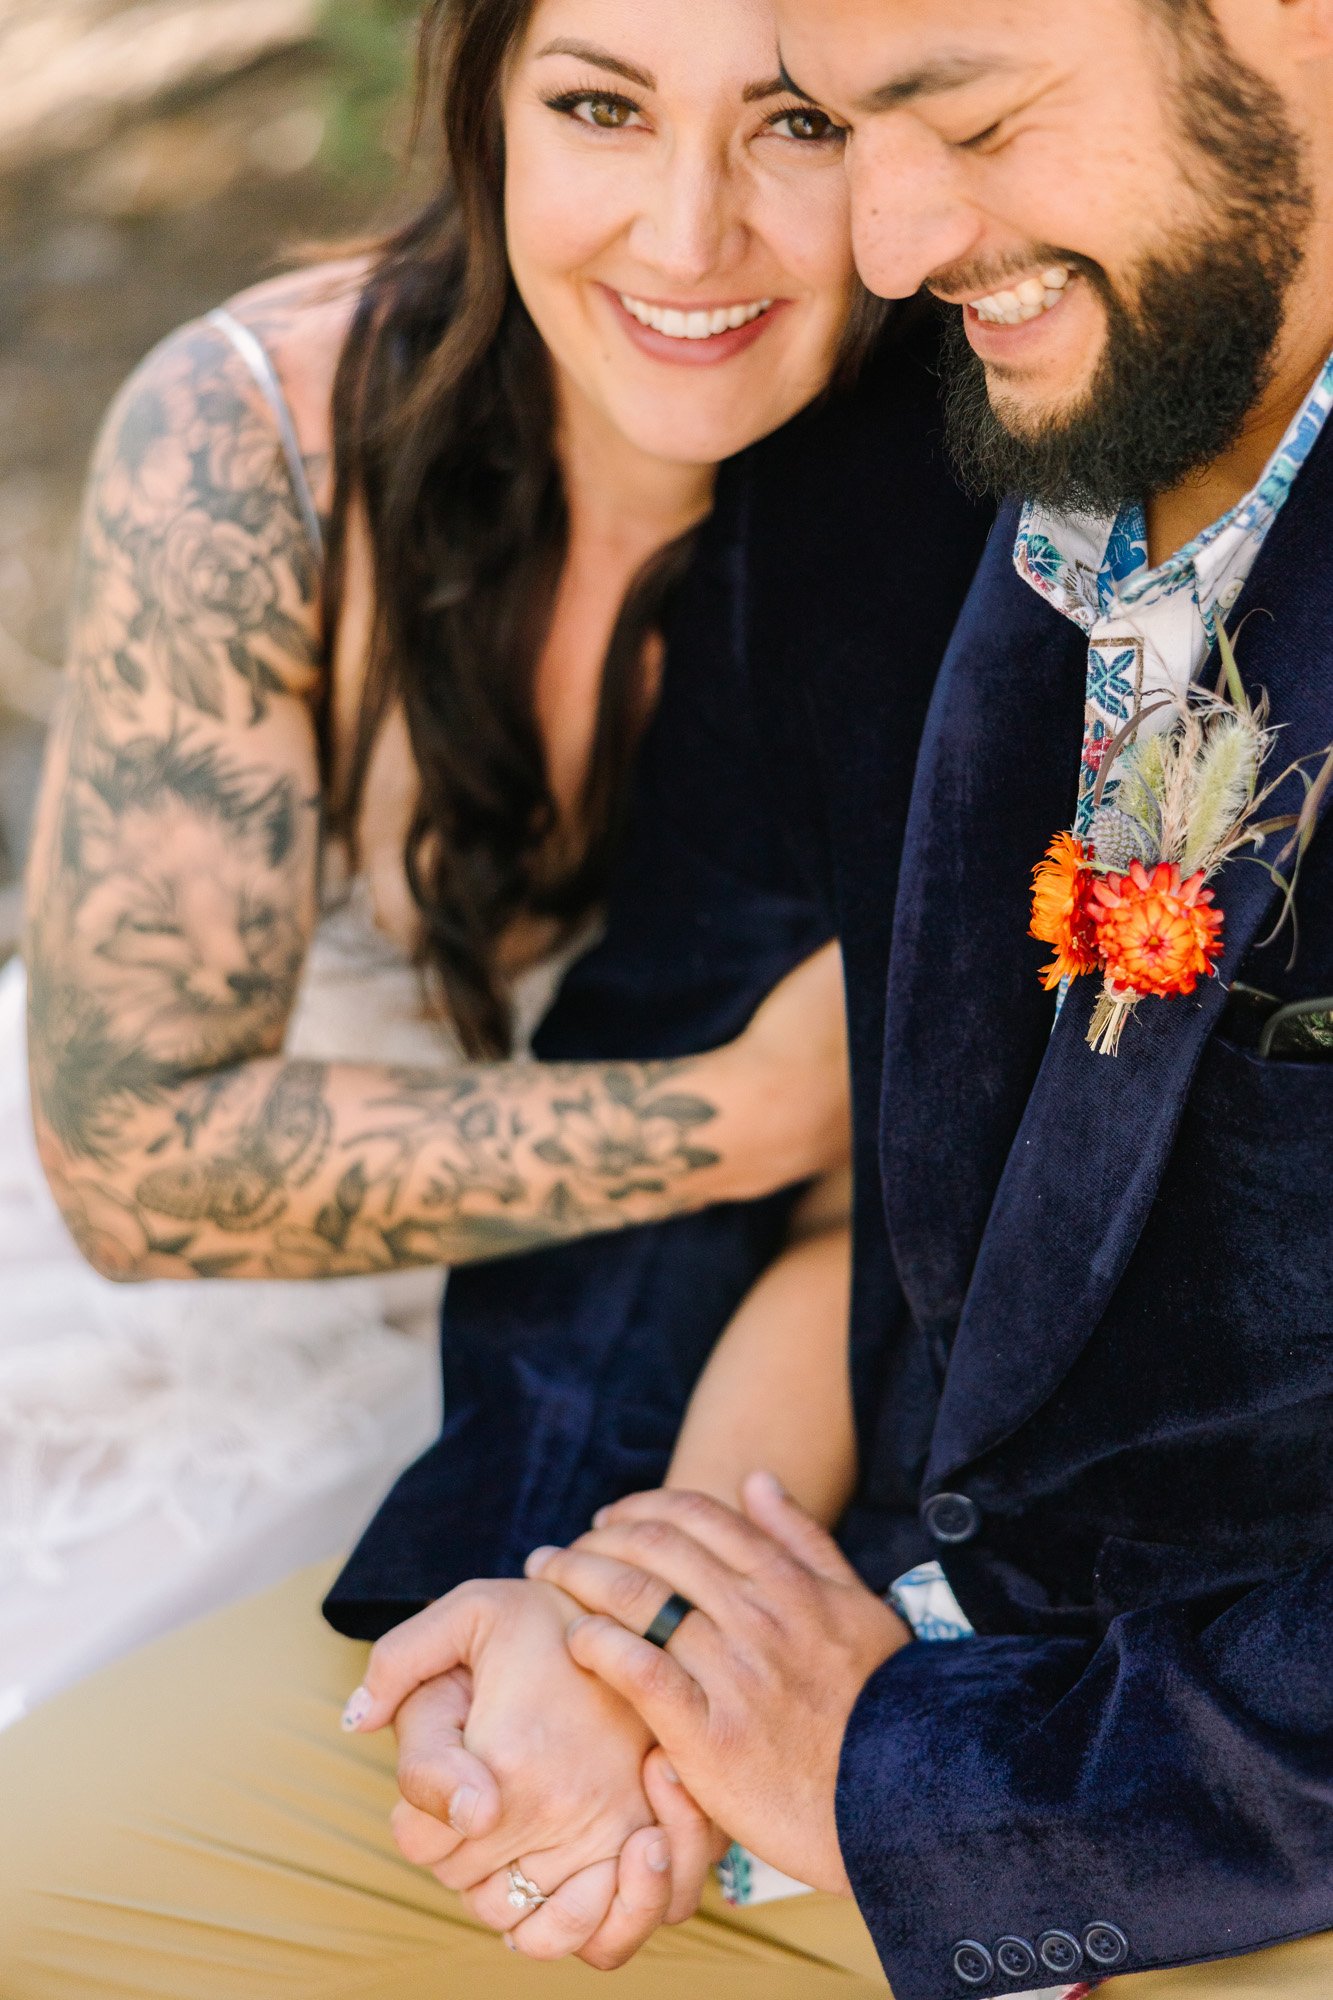 the bride and groom in this elopement wedding by the lake